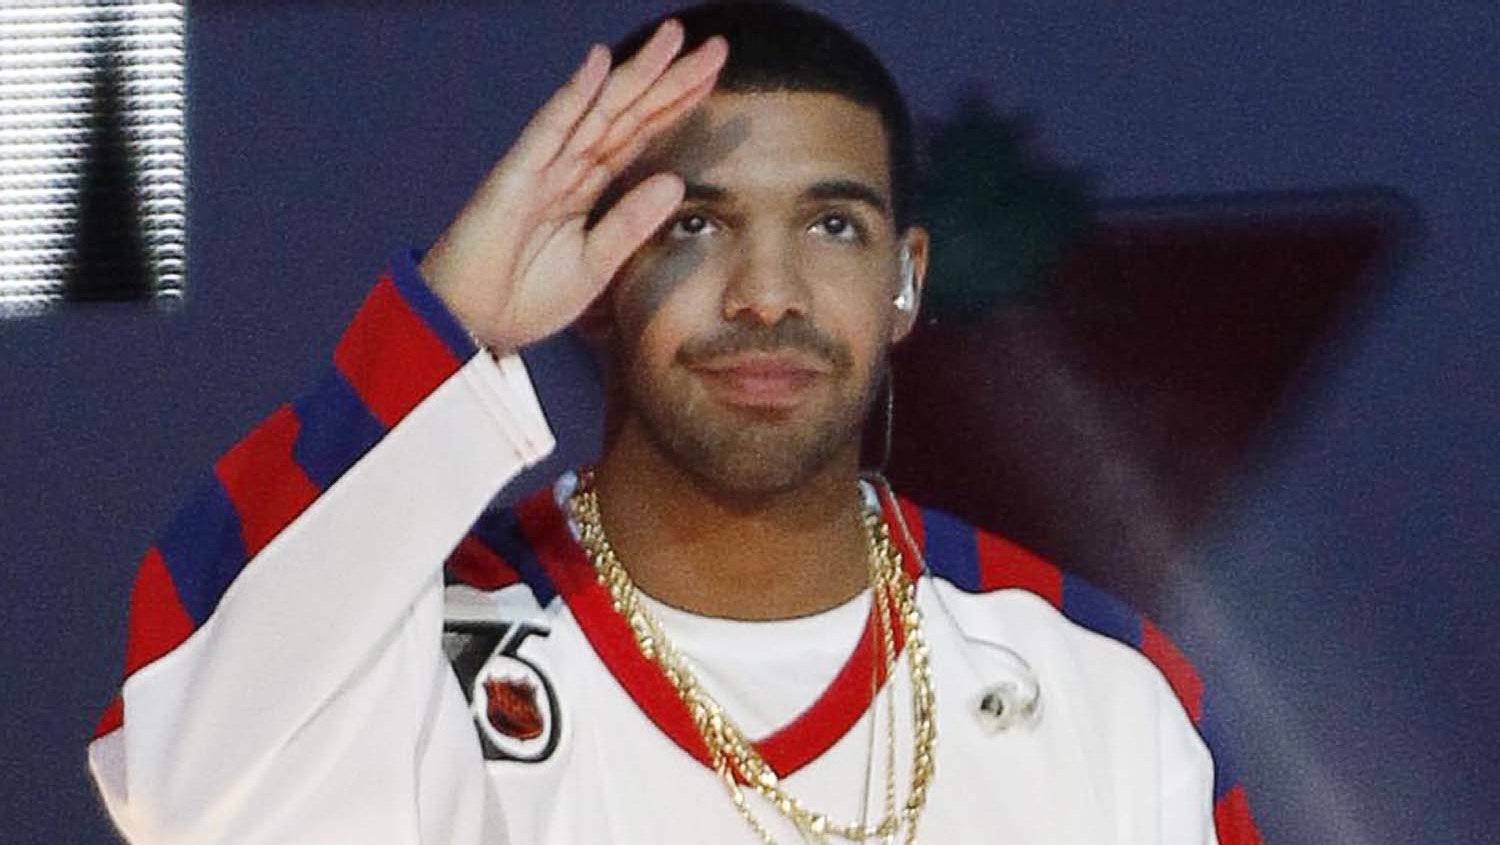 Ex-girlfriend suing Drake over song royalties - The Globe and Mail